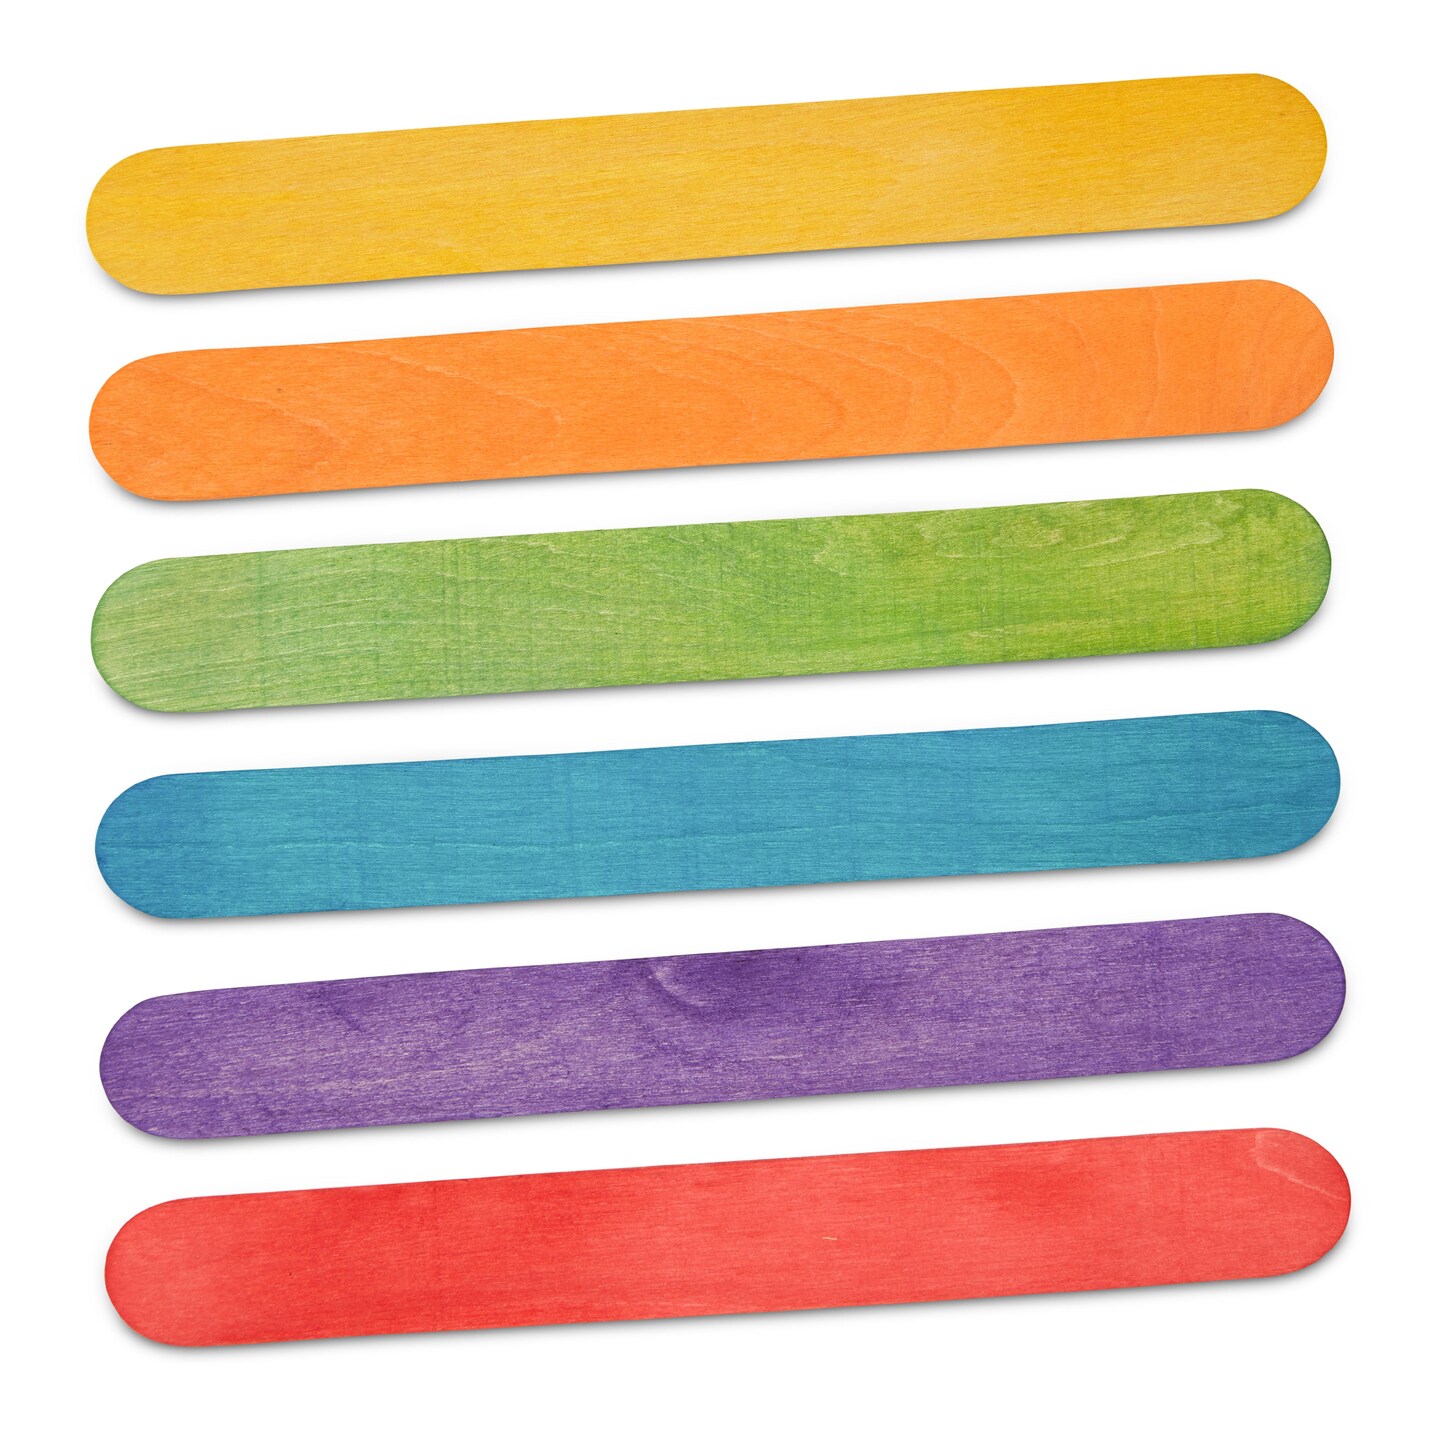 Colored Popsicle Sticks for Crafts, 6 inches Long x 3/4 inch Wide